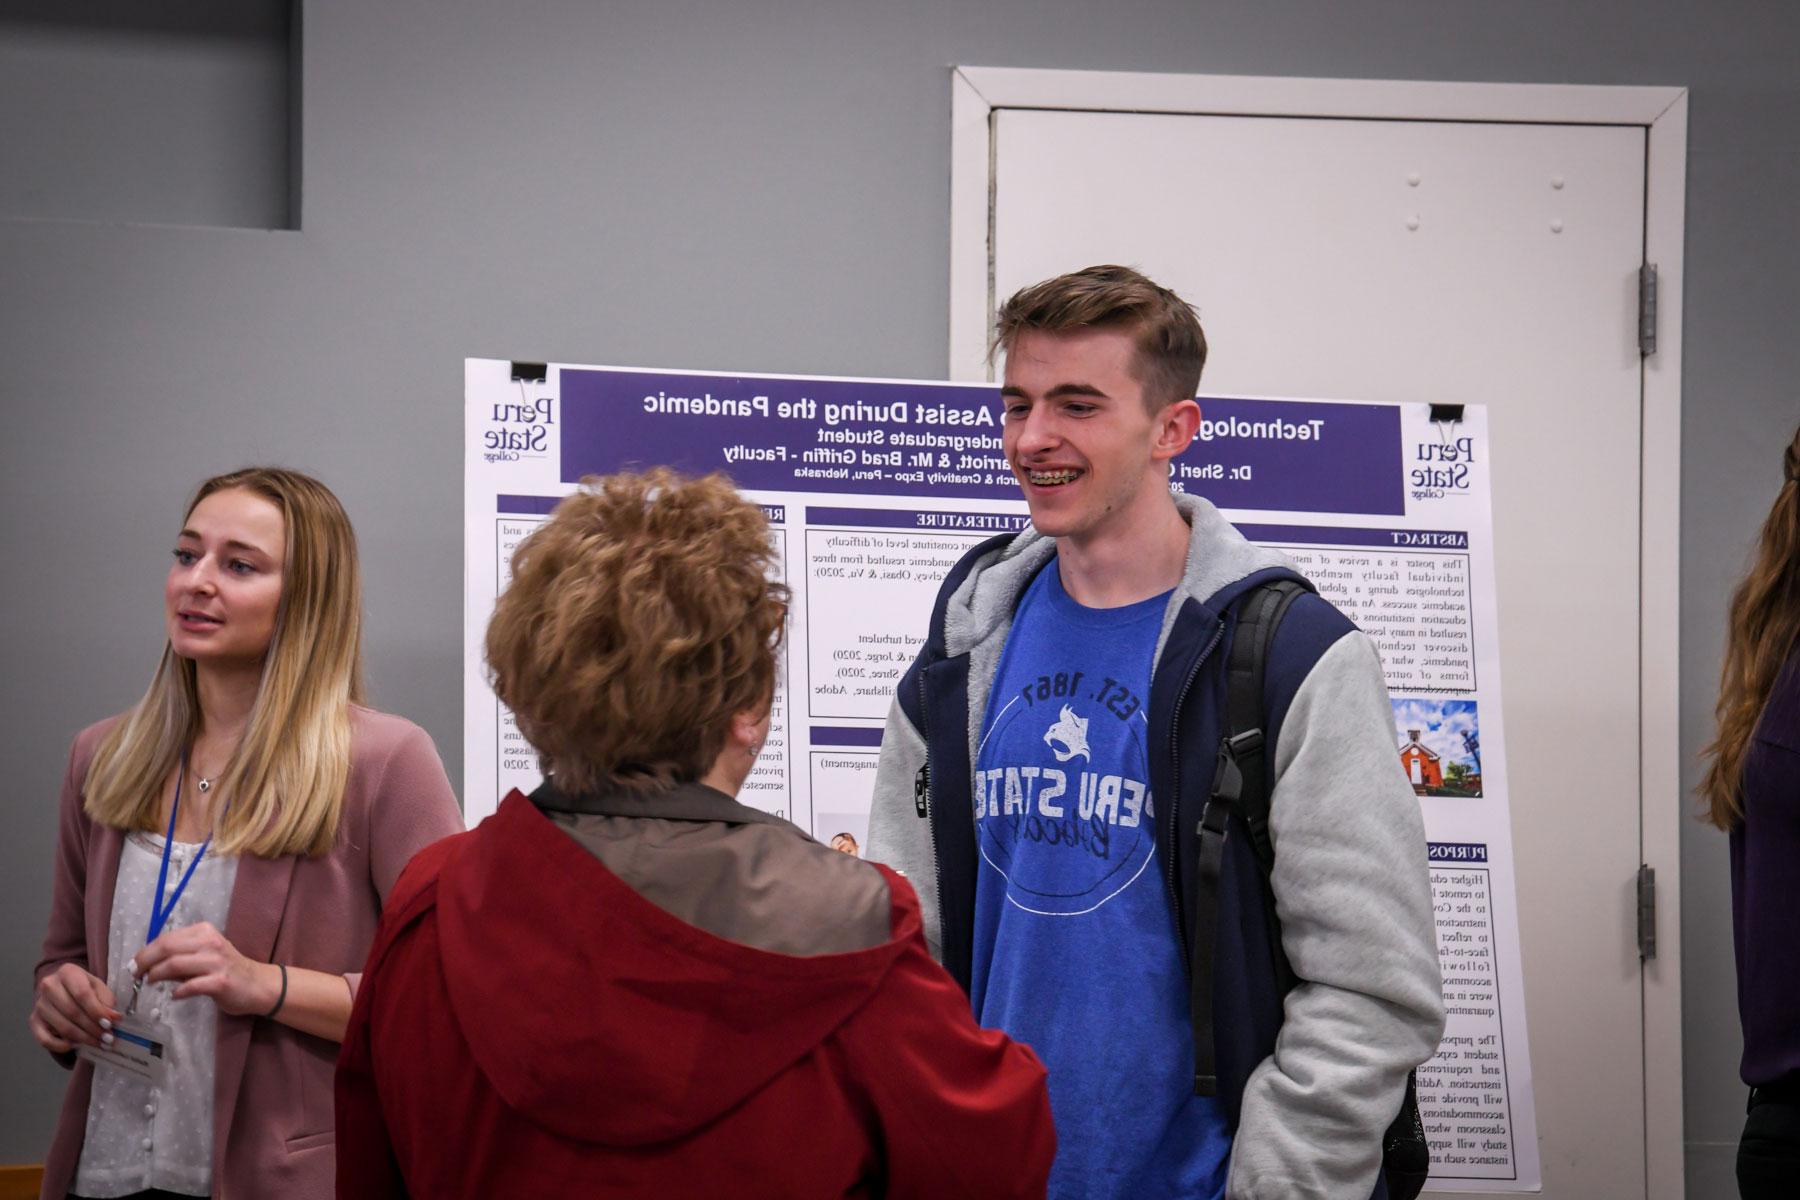 male student presenting a poster